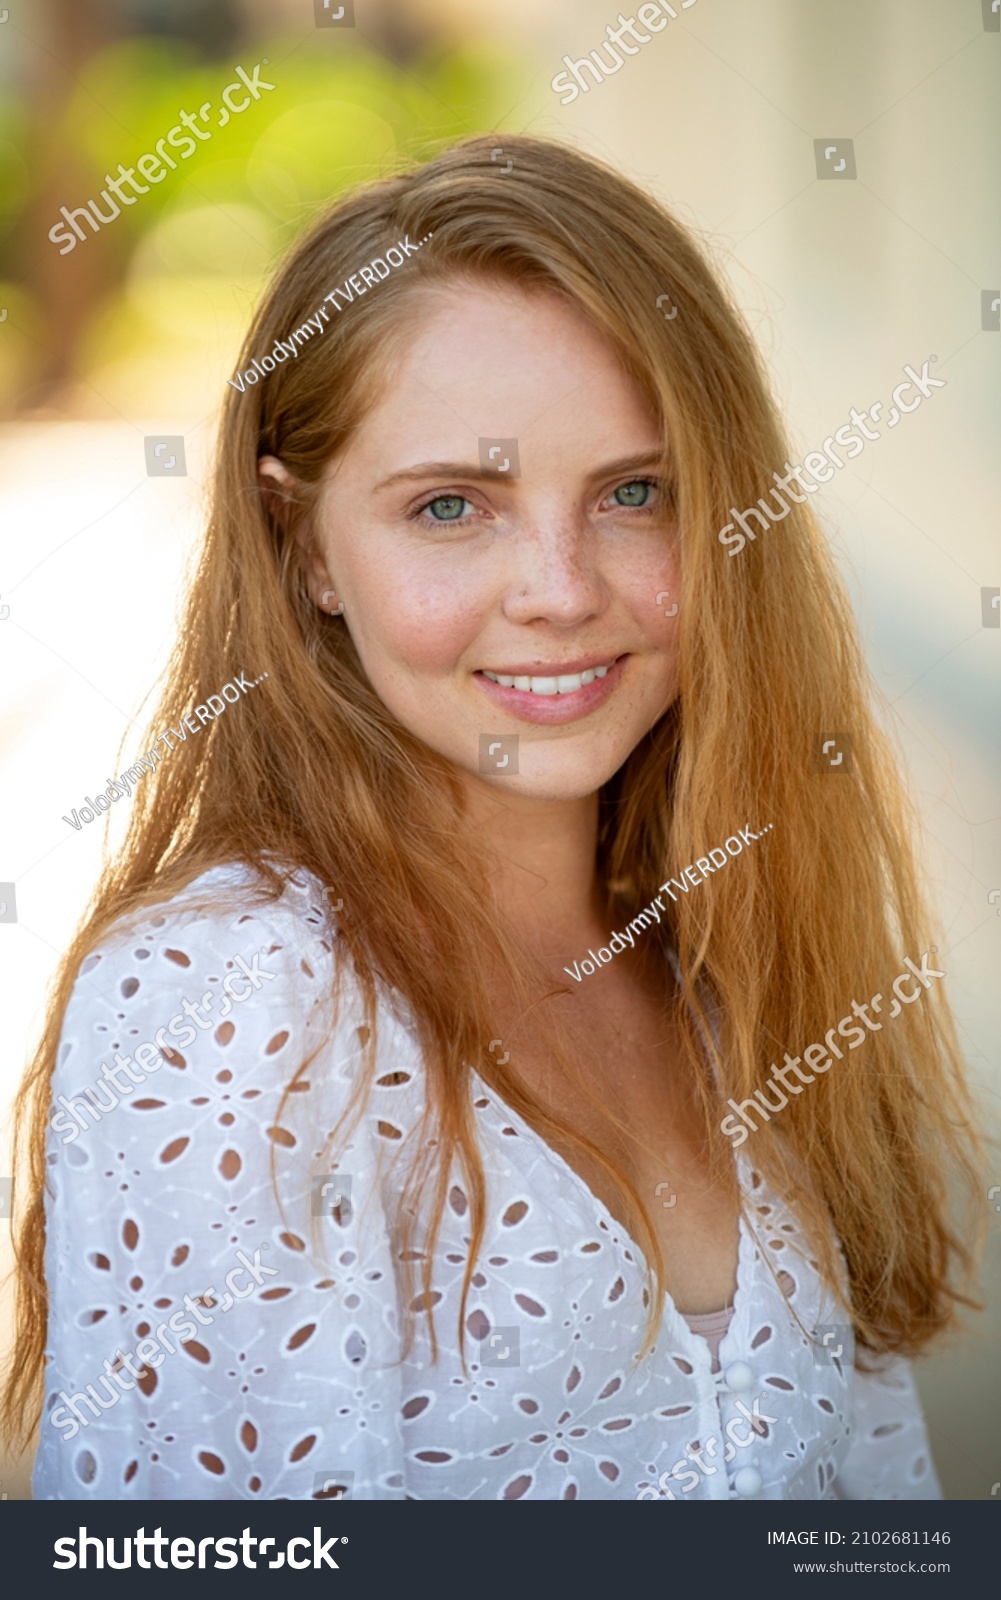 Woman with romantic smile. Close up face of young stylish woman. Beautiful fashionable girl outdoor portrait. #2102681146